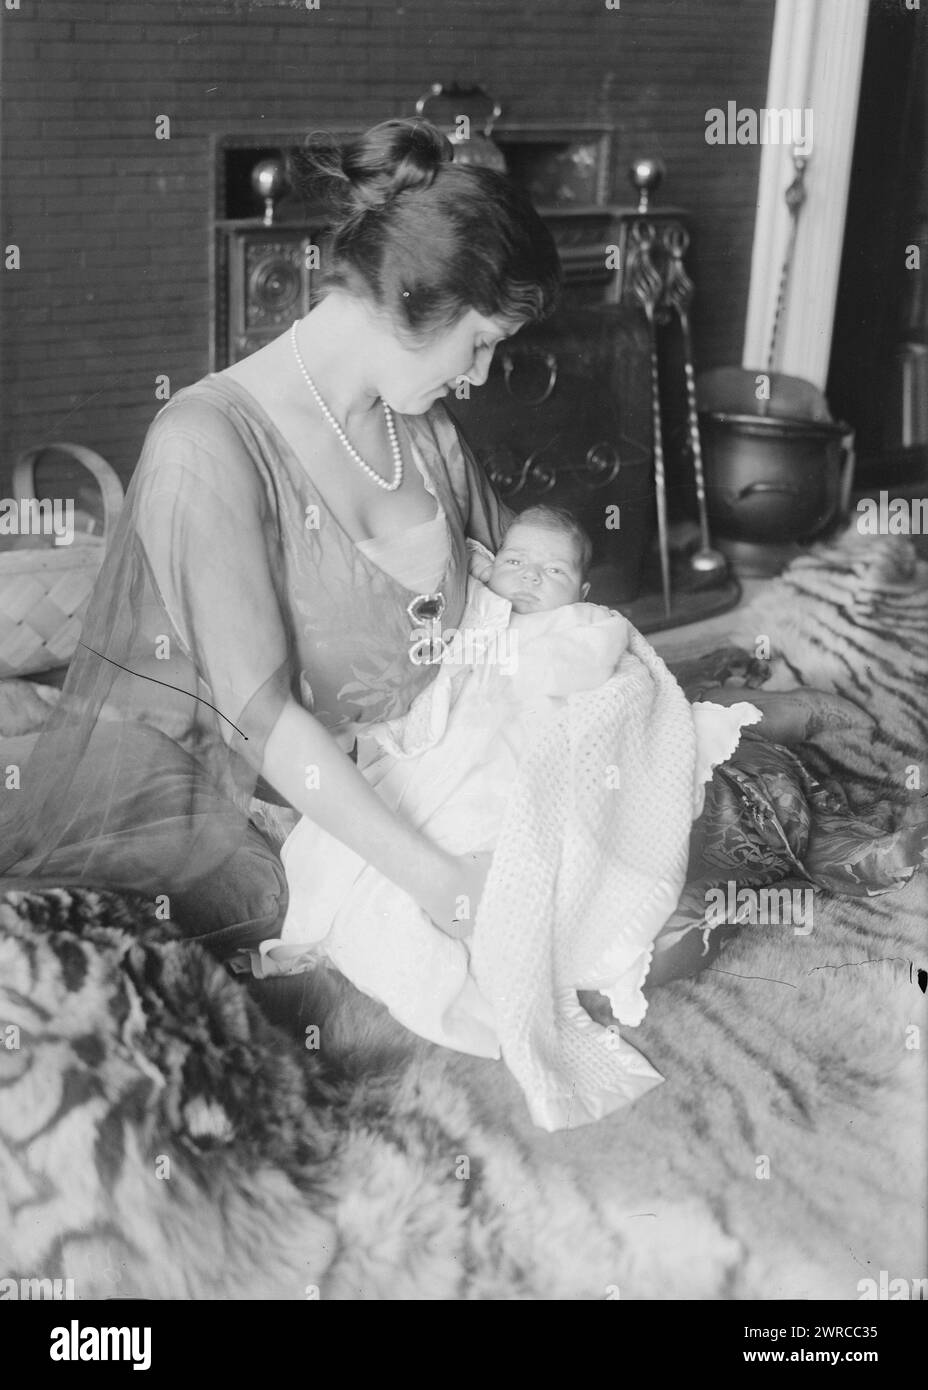 Alma Gluck & baby, Photograph shows Romanian-American opera singer Alma Gluck (1884-1938) and her baby Efrem Zimbalist Jr. (1918-2014) on a tiger skin rug., 1918 or 1919, Glass negatives, 1 negative: glass Stock Photo